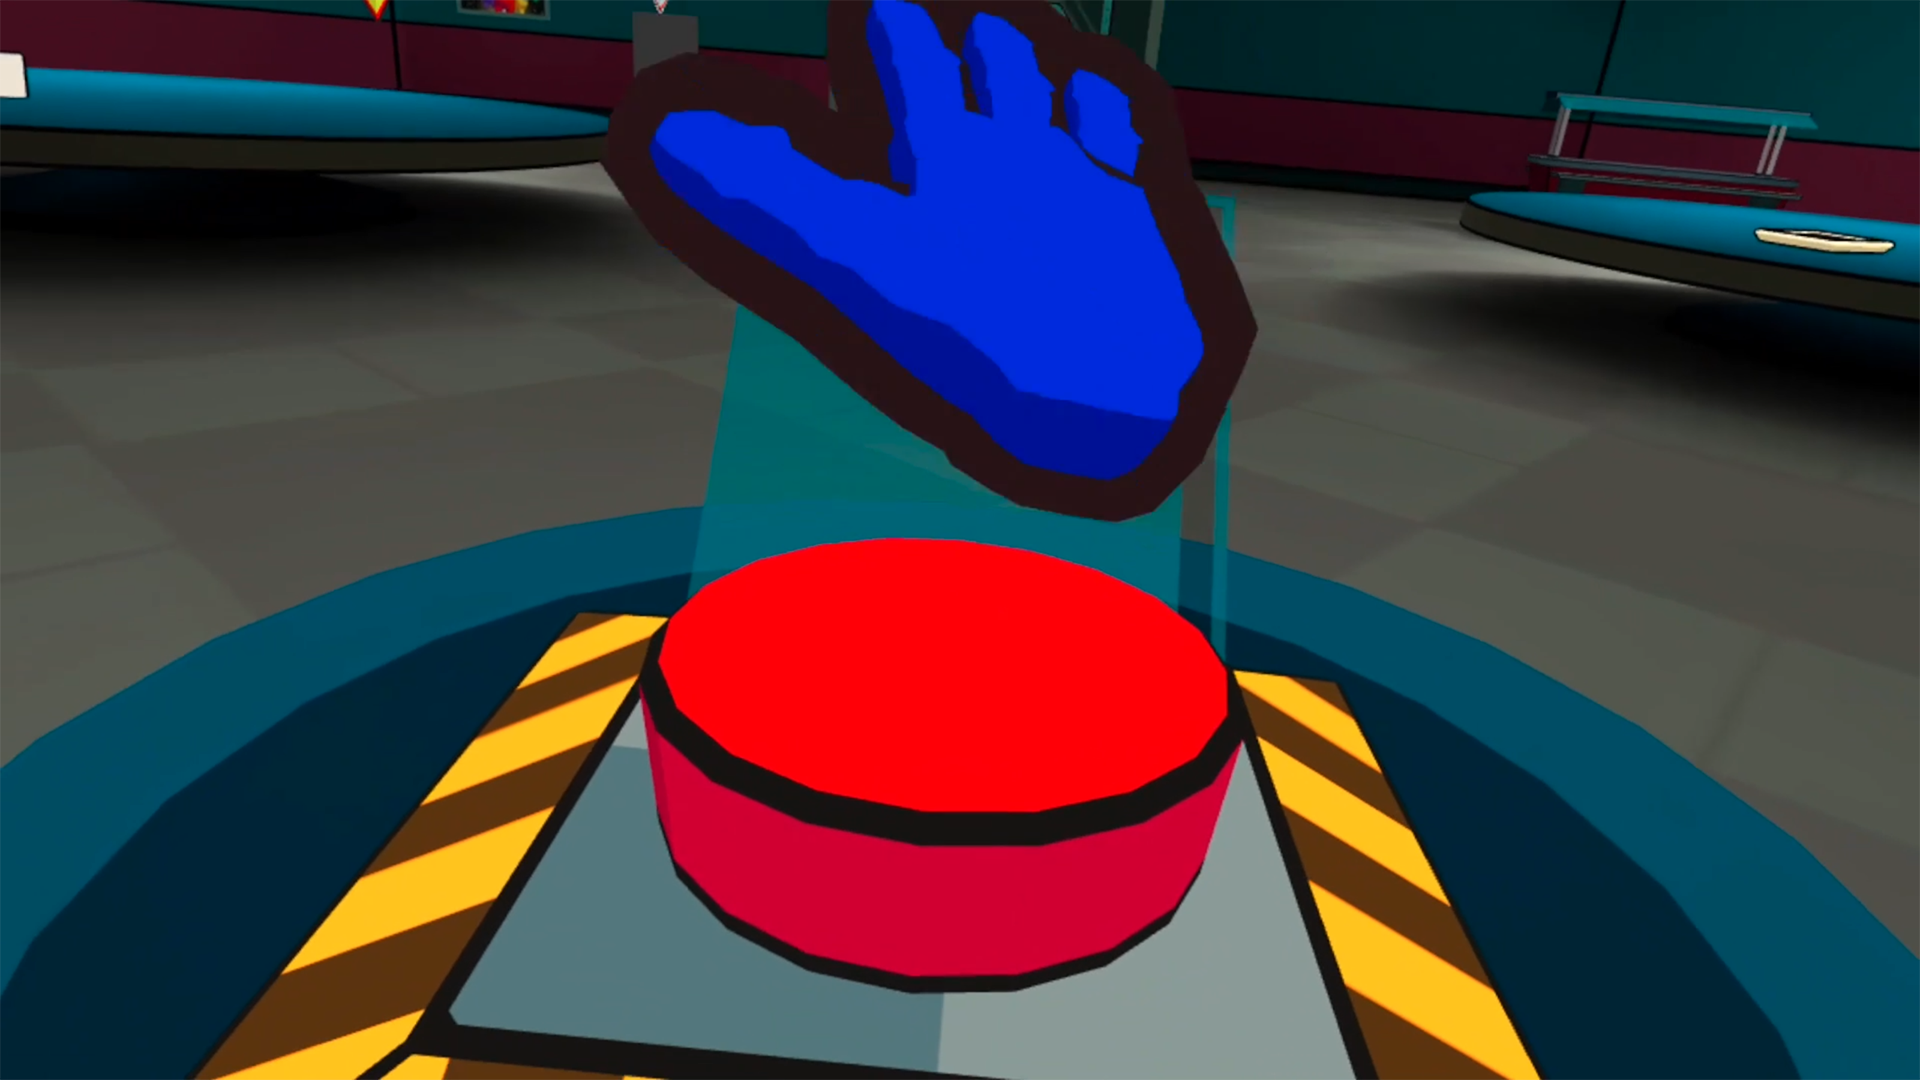 A hand about to hit the button in Among Us VR